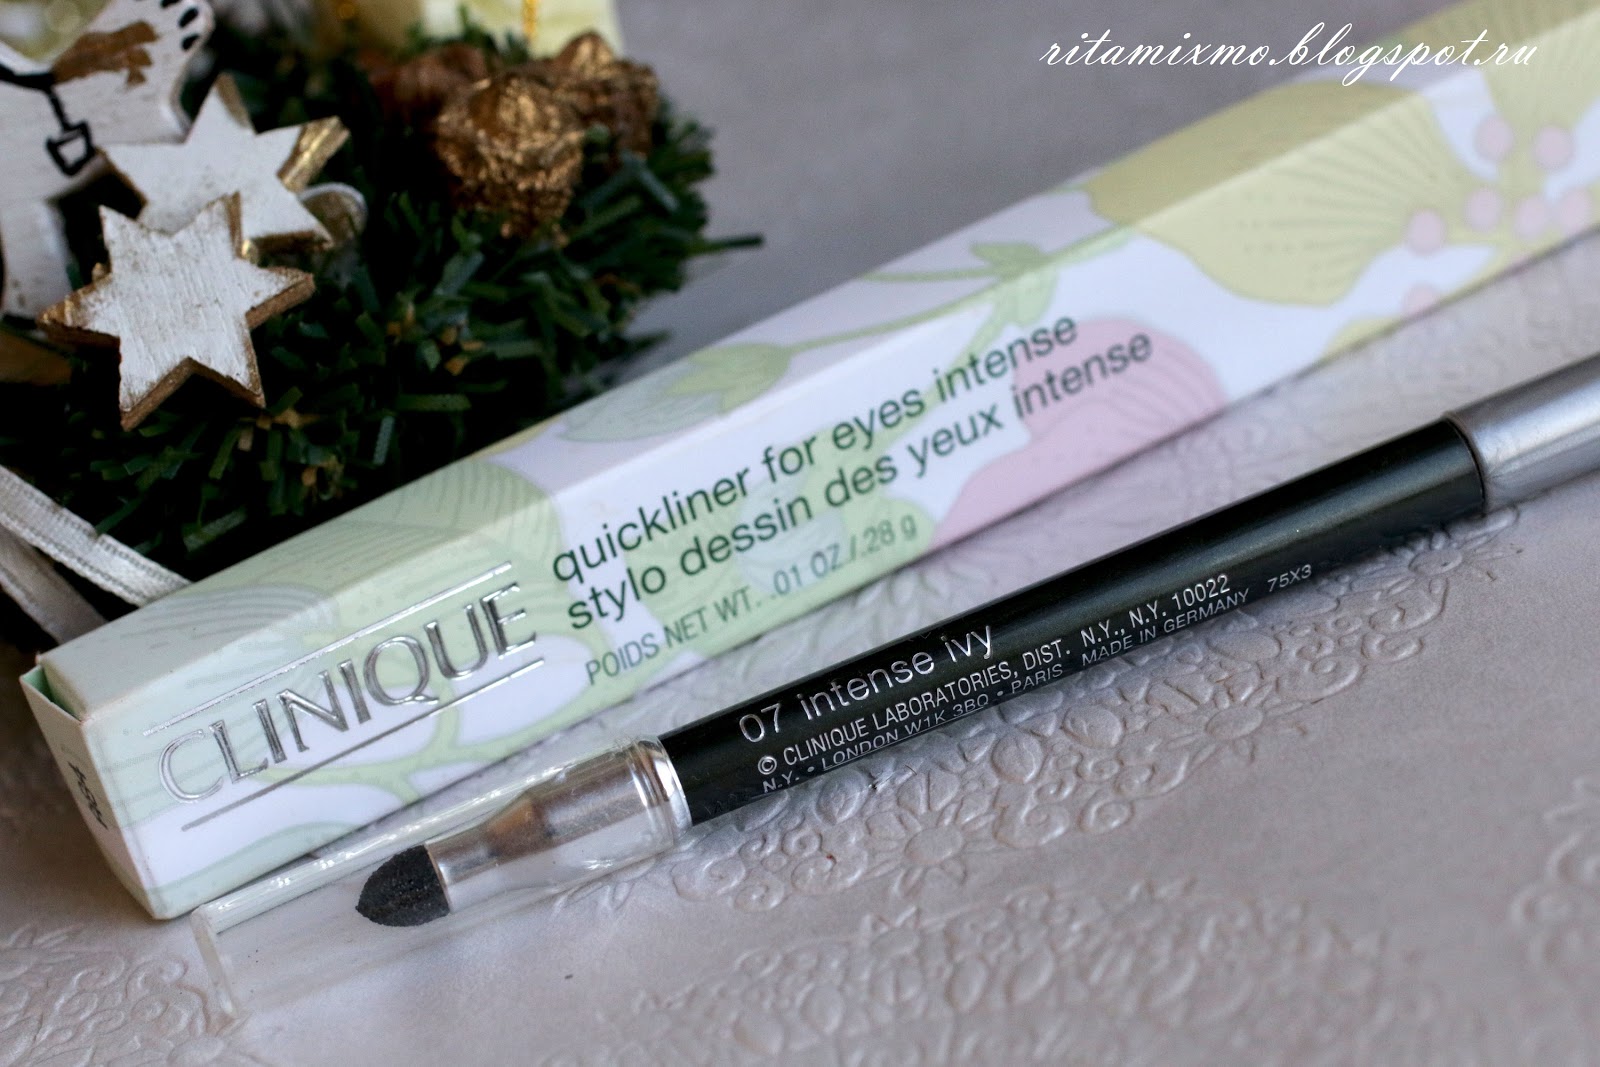 Clinique Quickliner For Eyes Intense 07 intense ivy. 